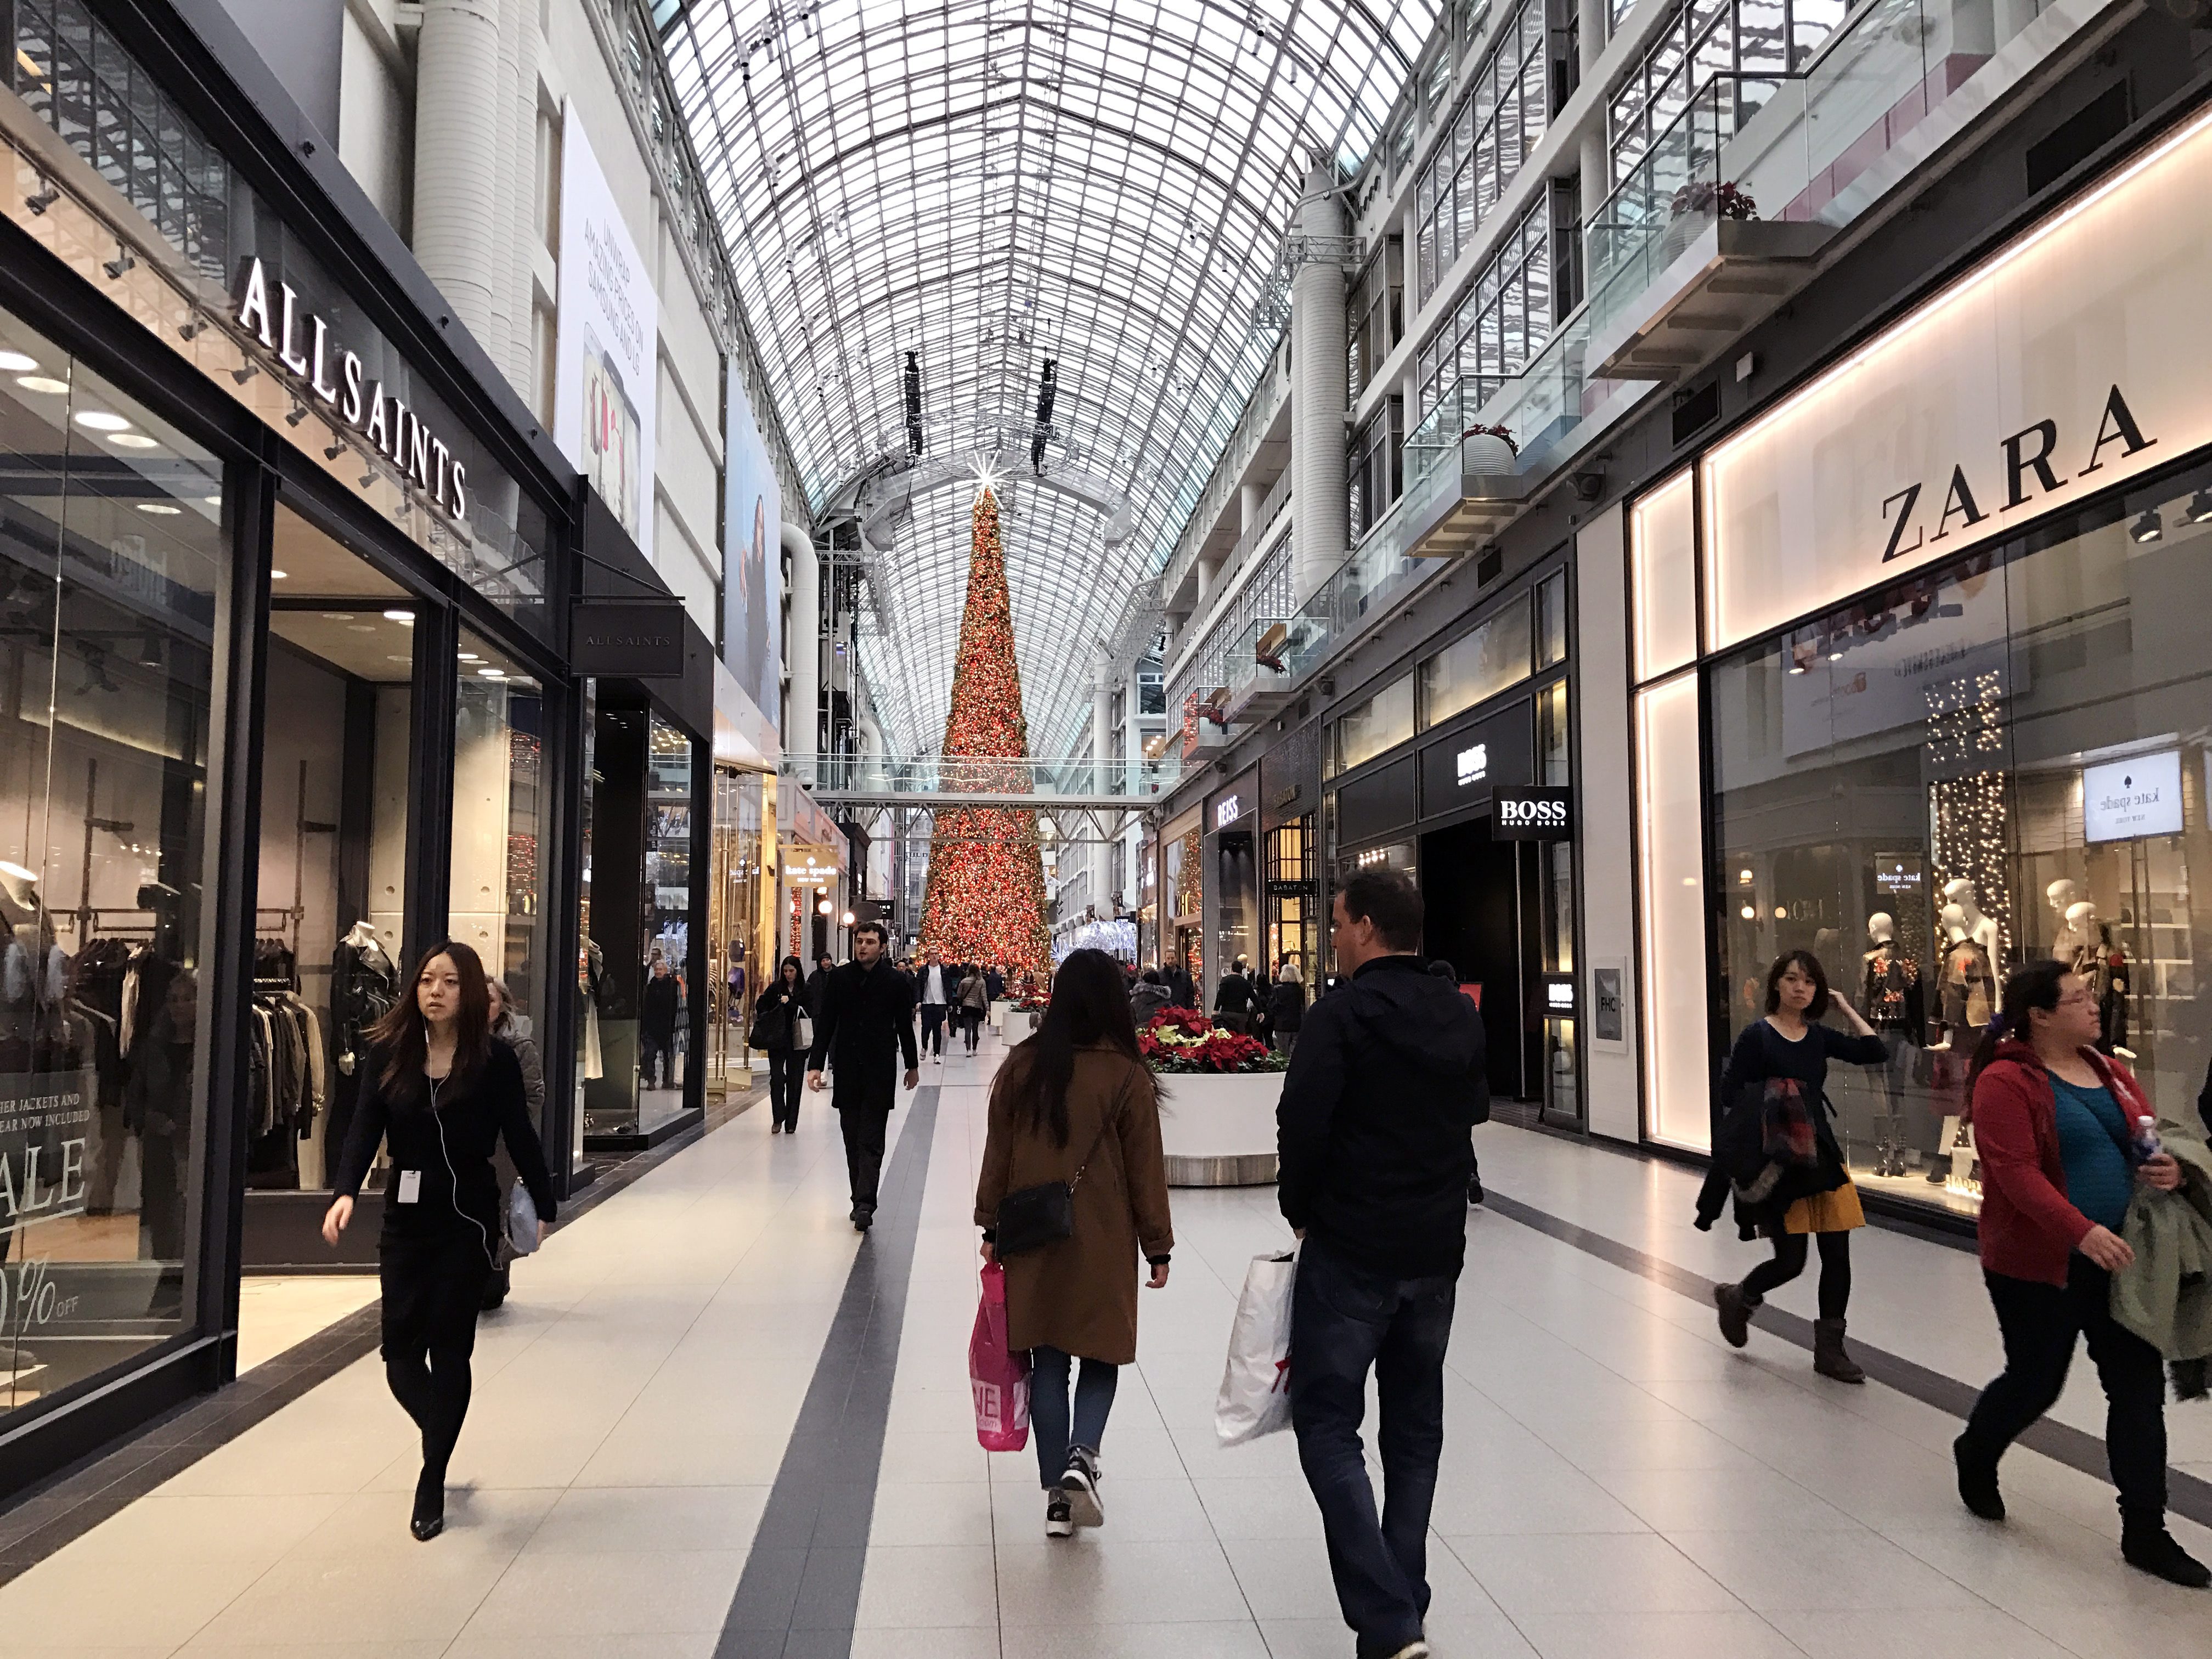 Police called to manage unexpected crowd at Toronto Eaton Centre - Toronto